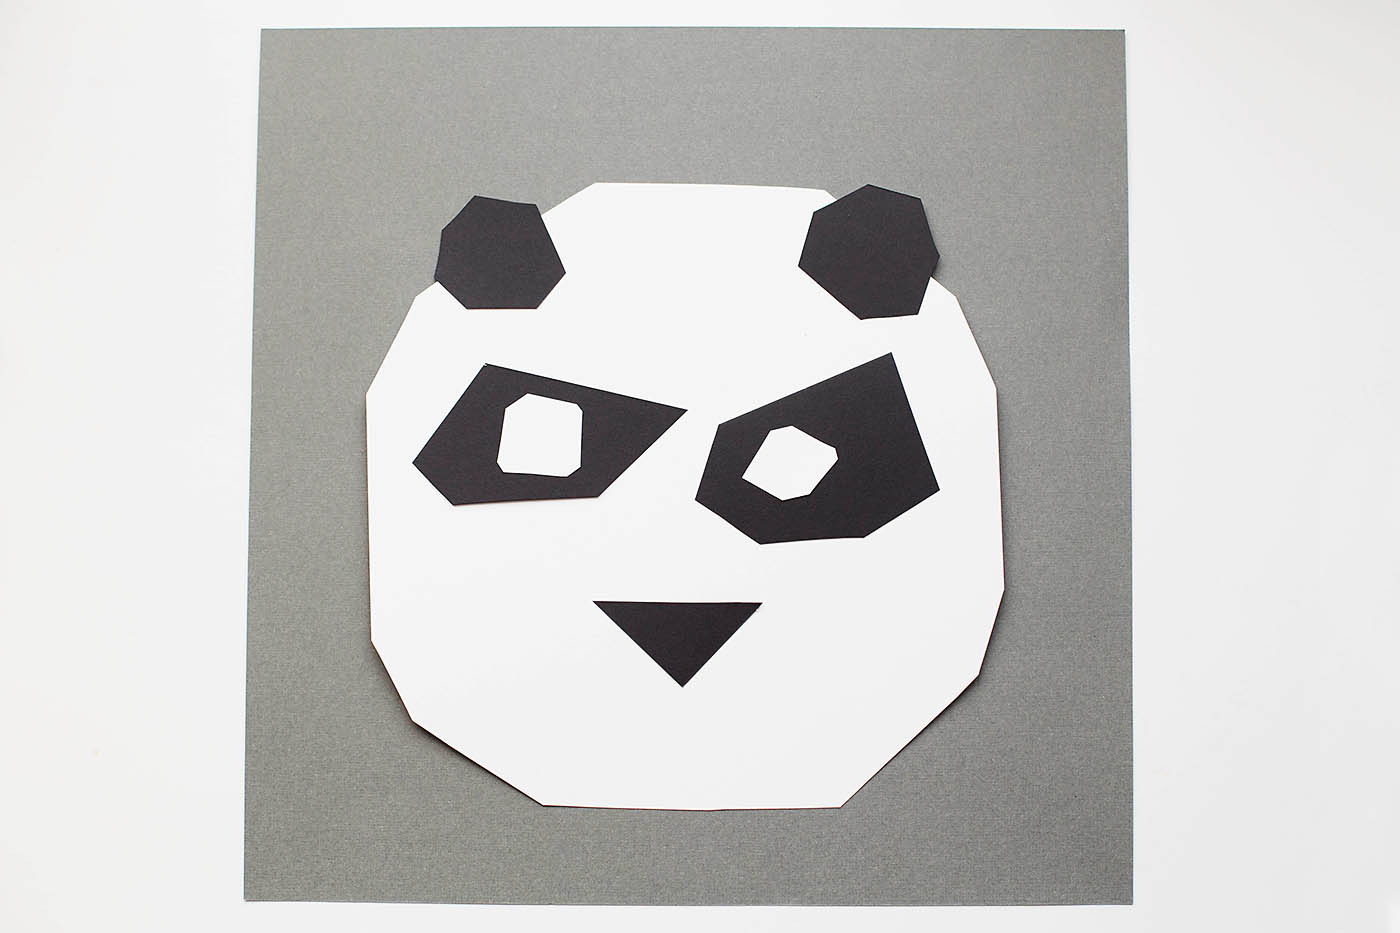 Geometric panda art inspired by Kung Fu Panda - make Po out of easy to cut shapes!